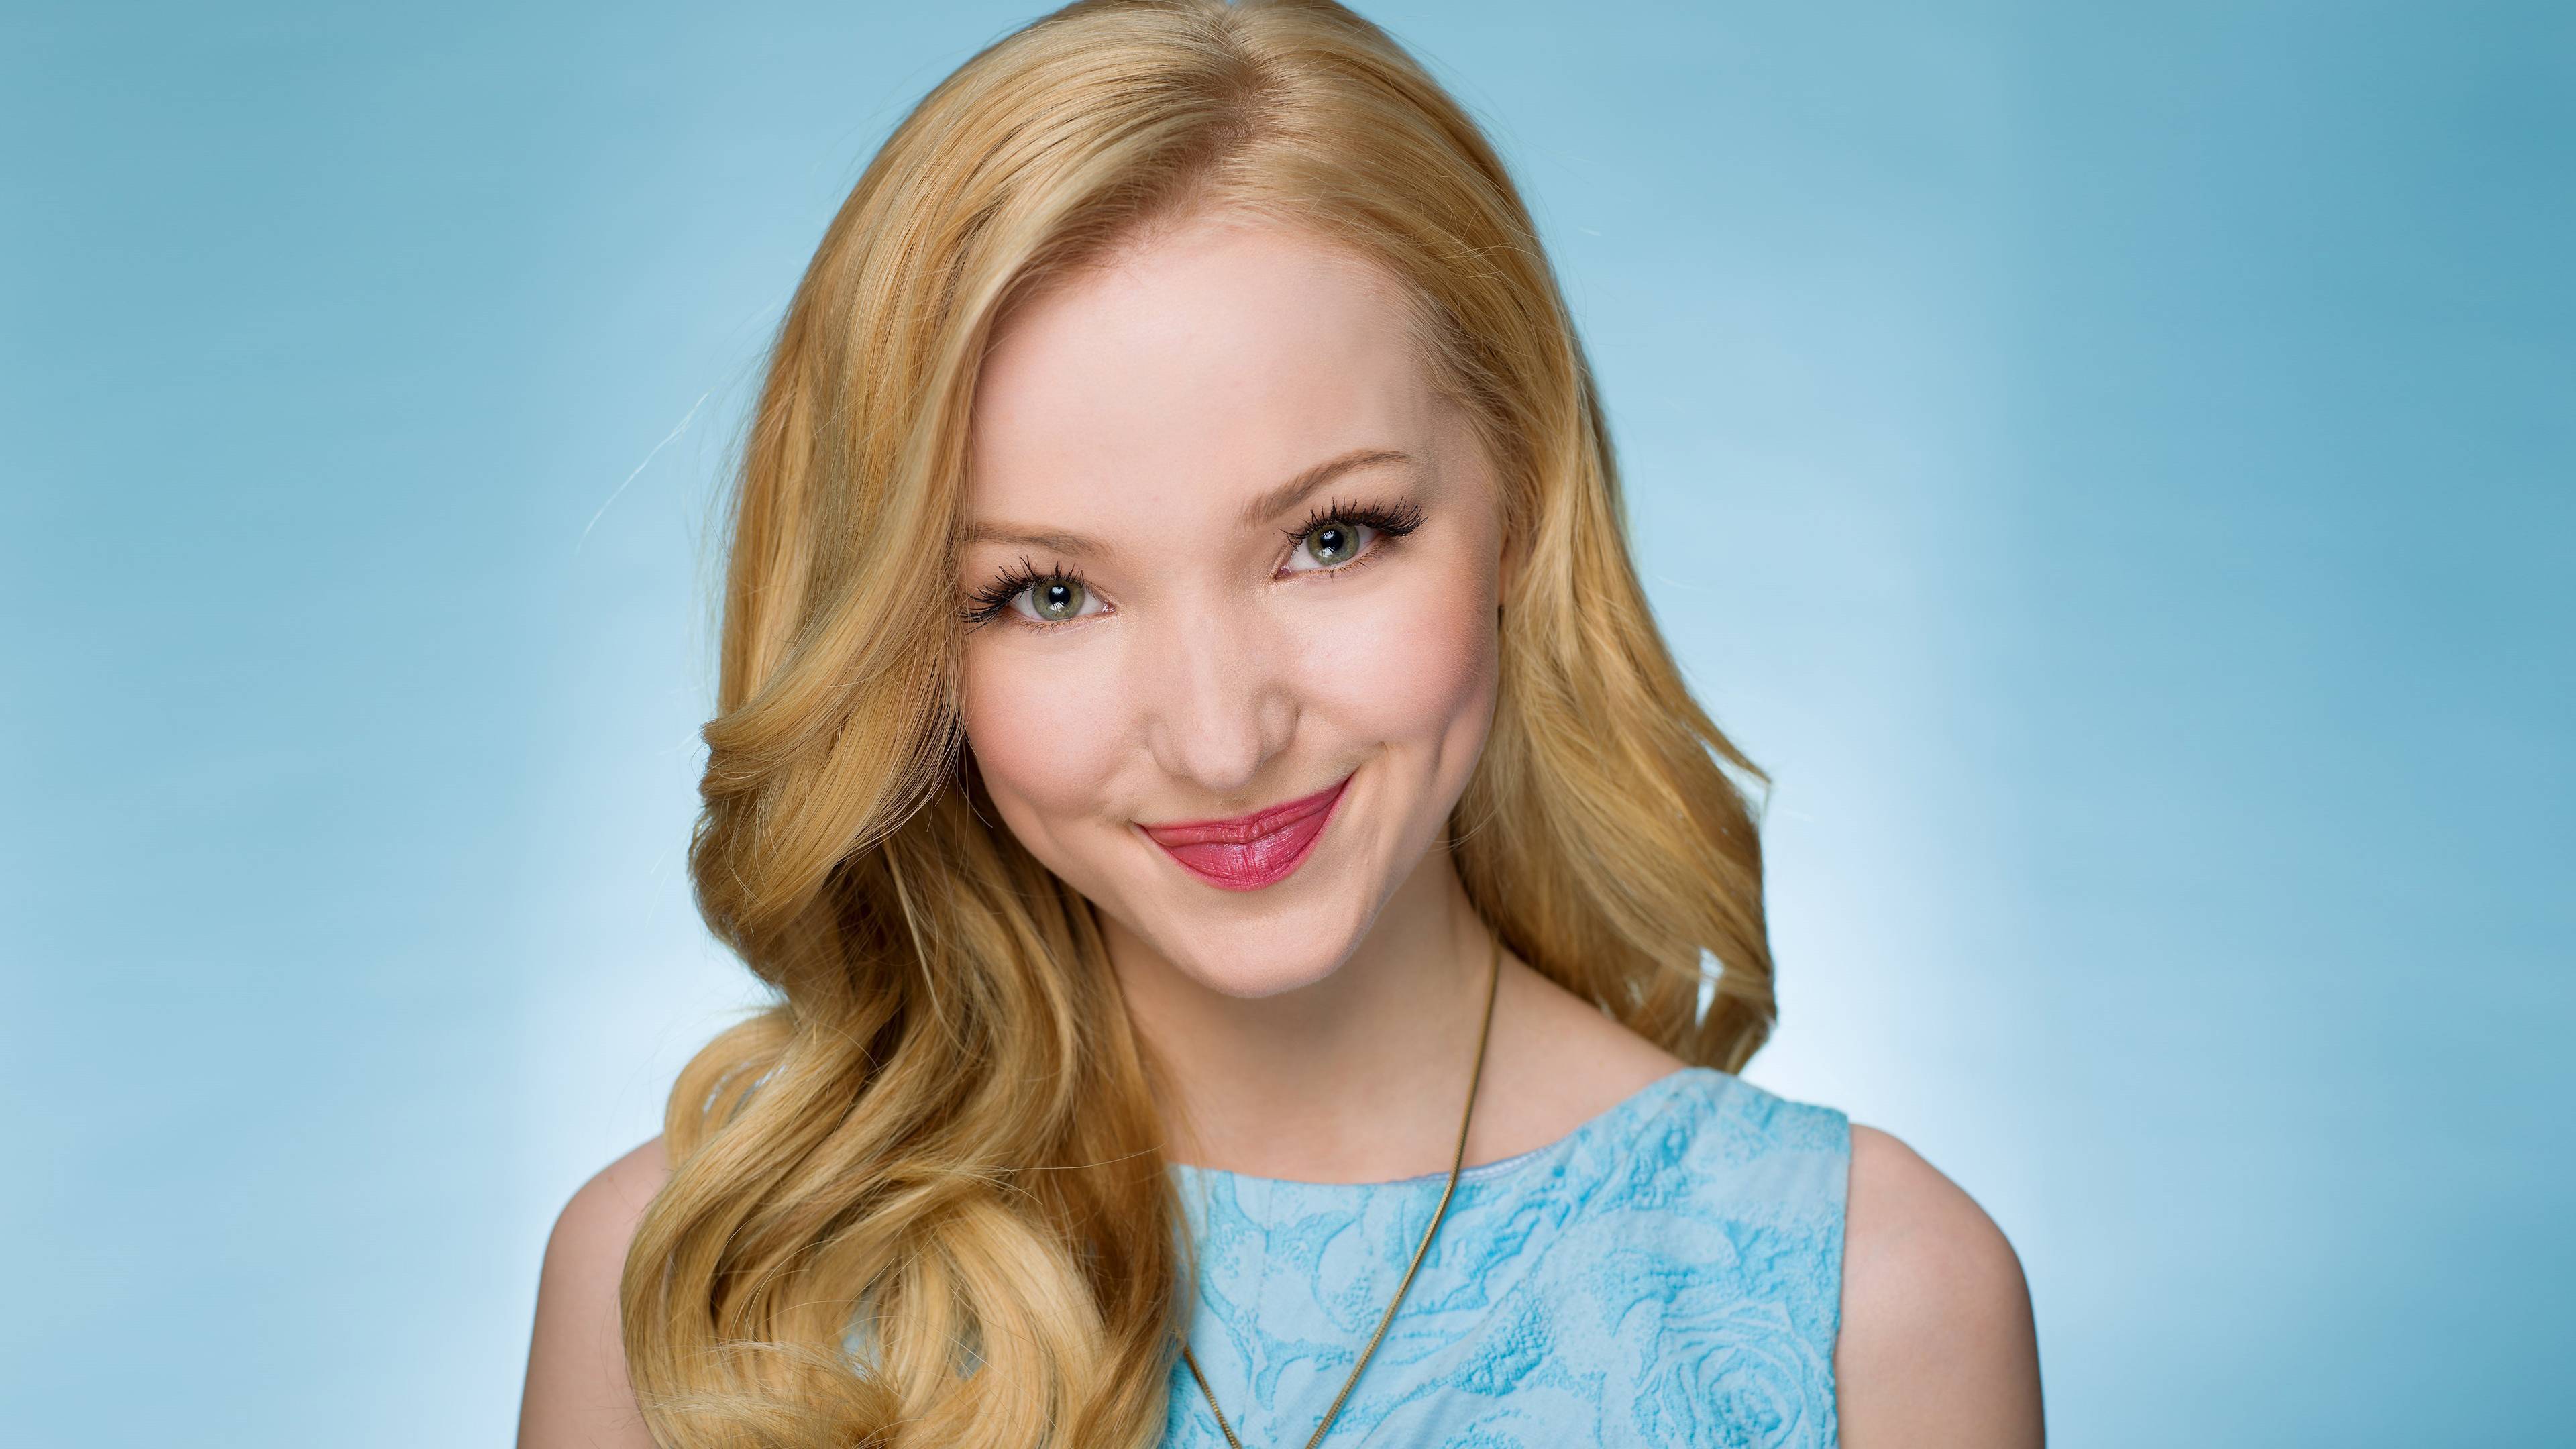 Cool Dove Cameron Wallpapers